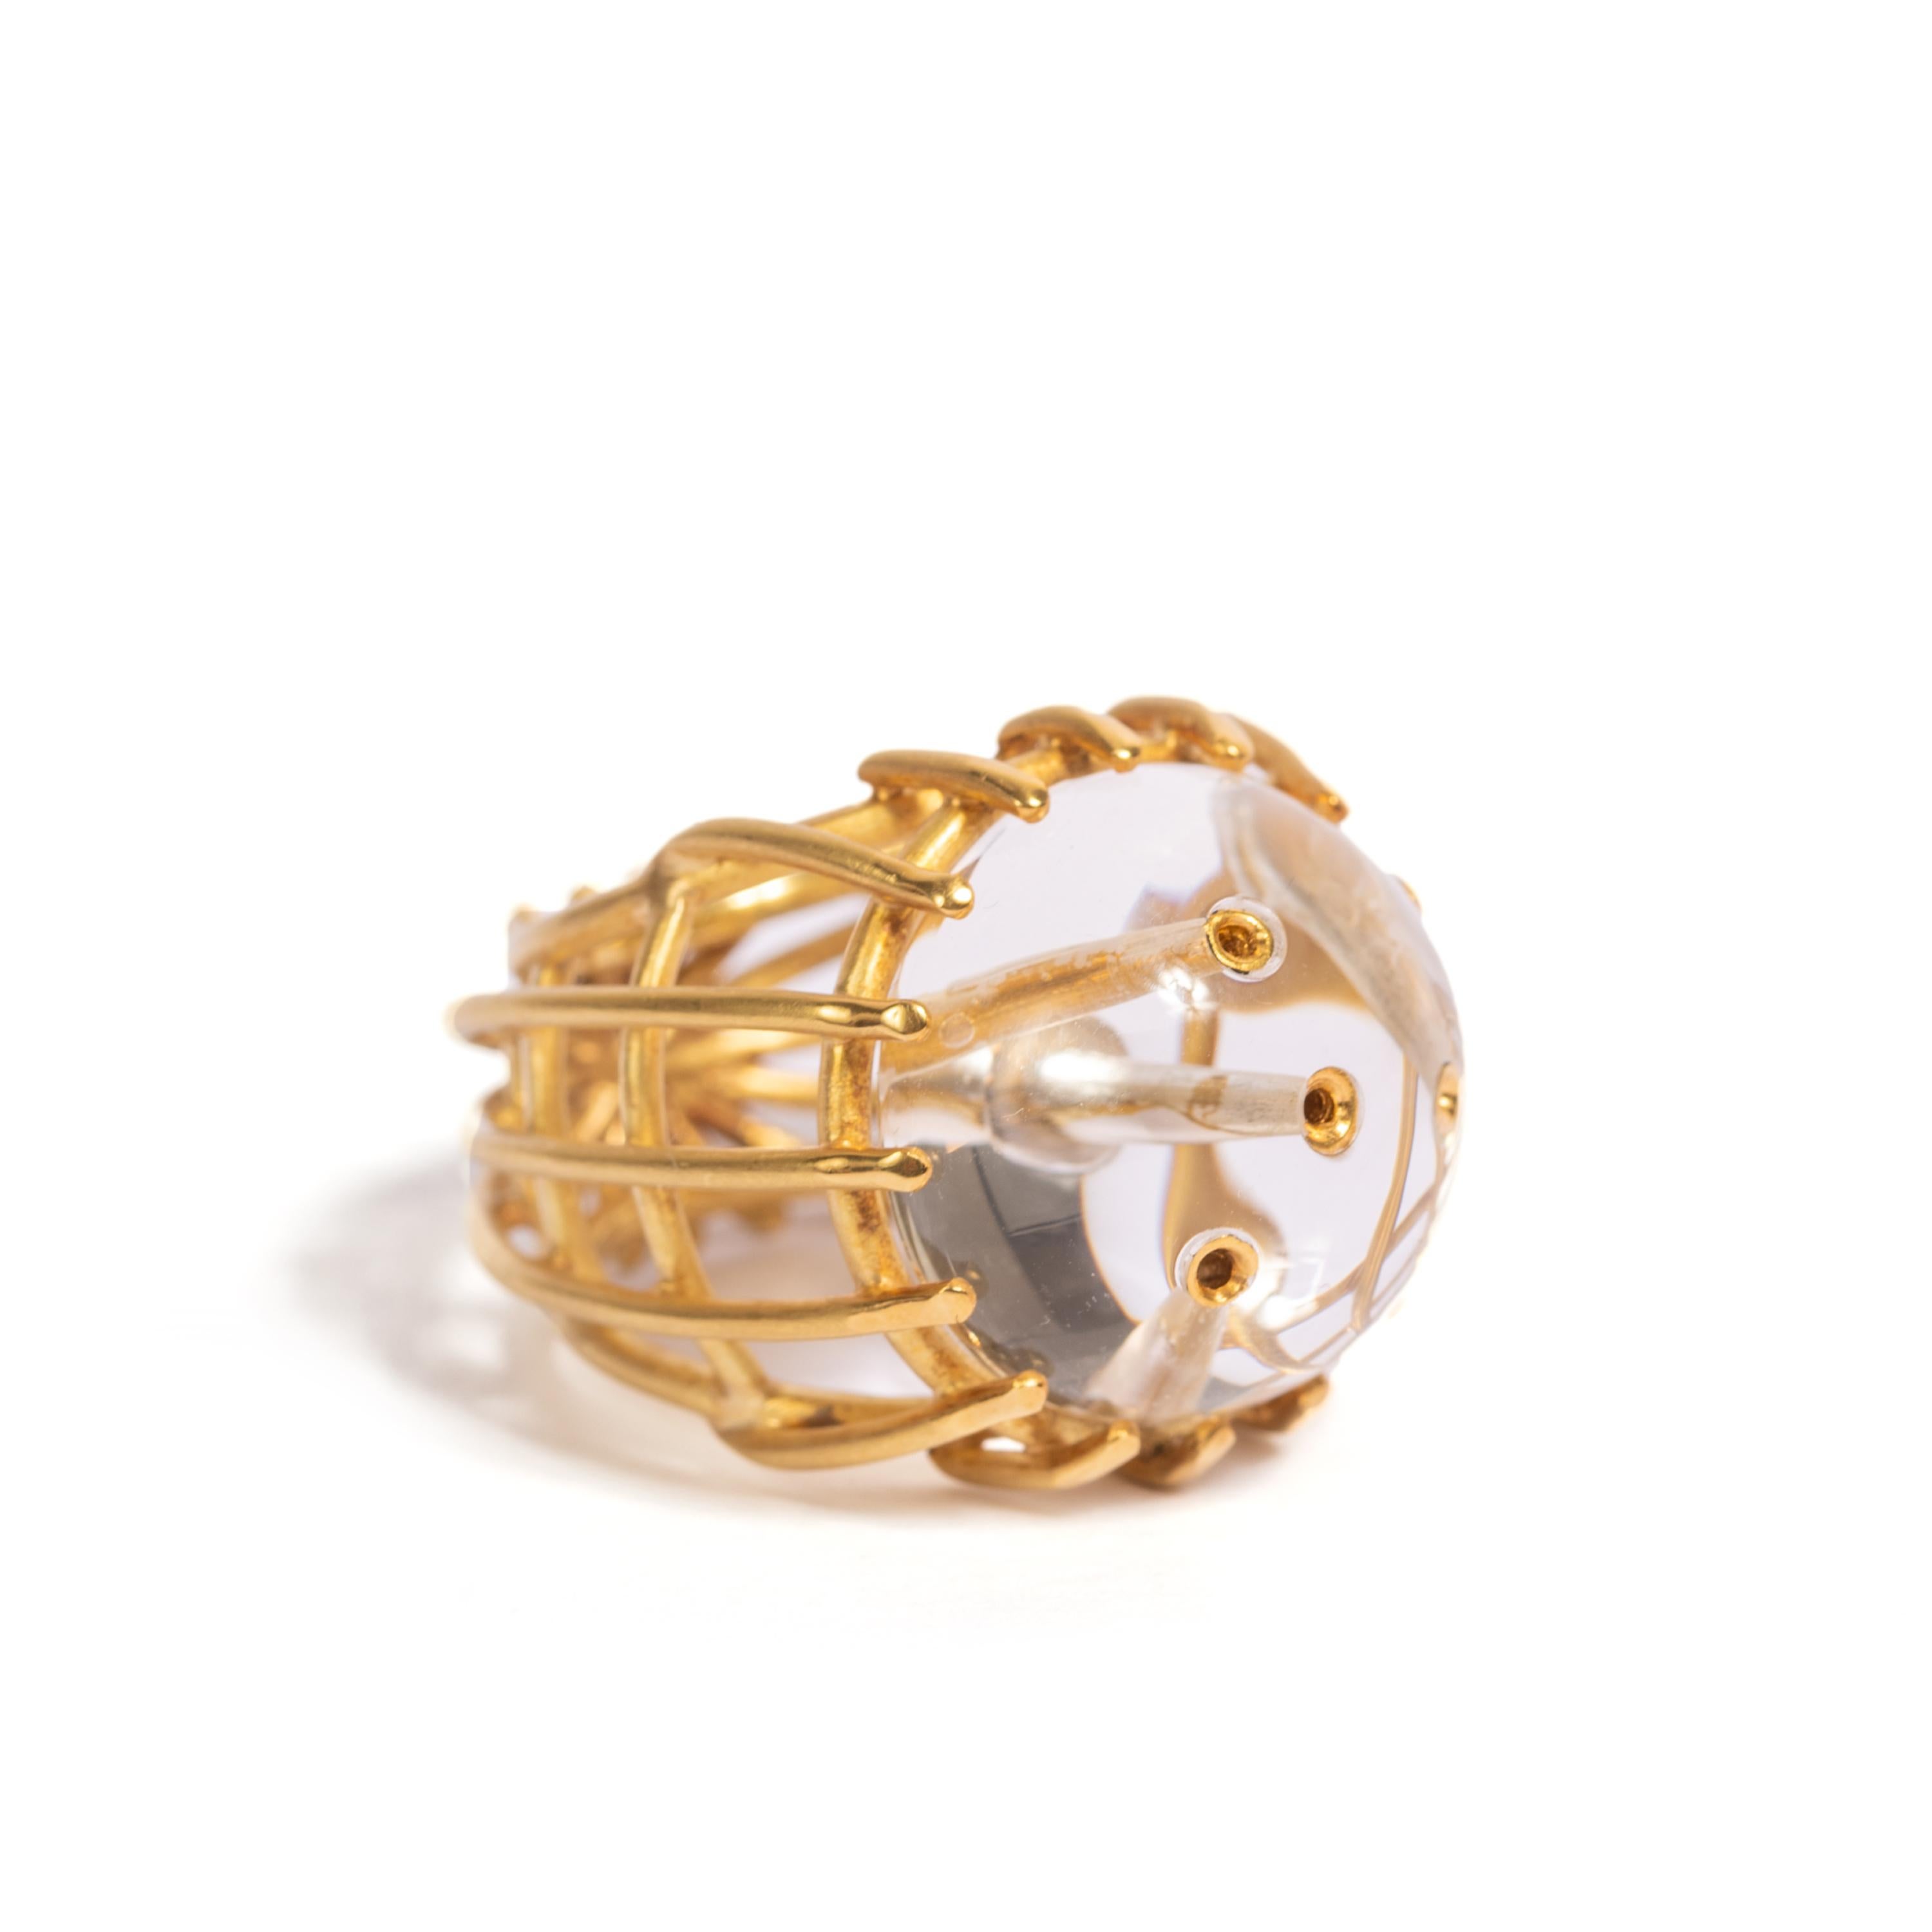 Beautiful ring by the Italian designer Giancarlo Montebello. The ring were designed directly for our Enrico Trizio 1868 jewelry. A very elegant yellow gold ring 